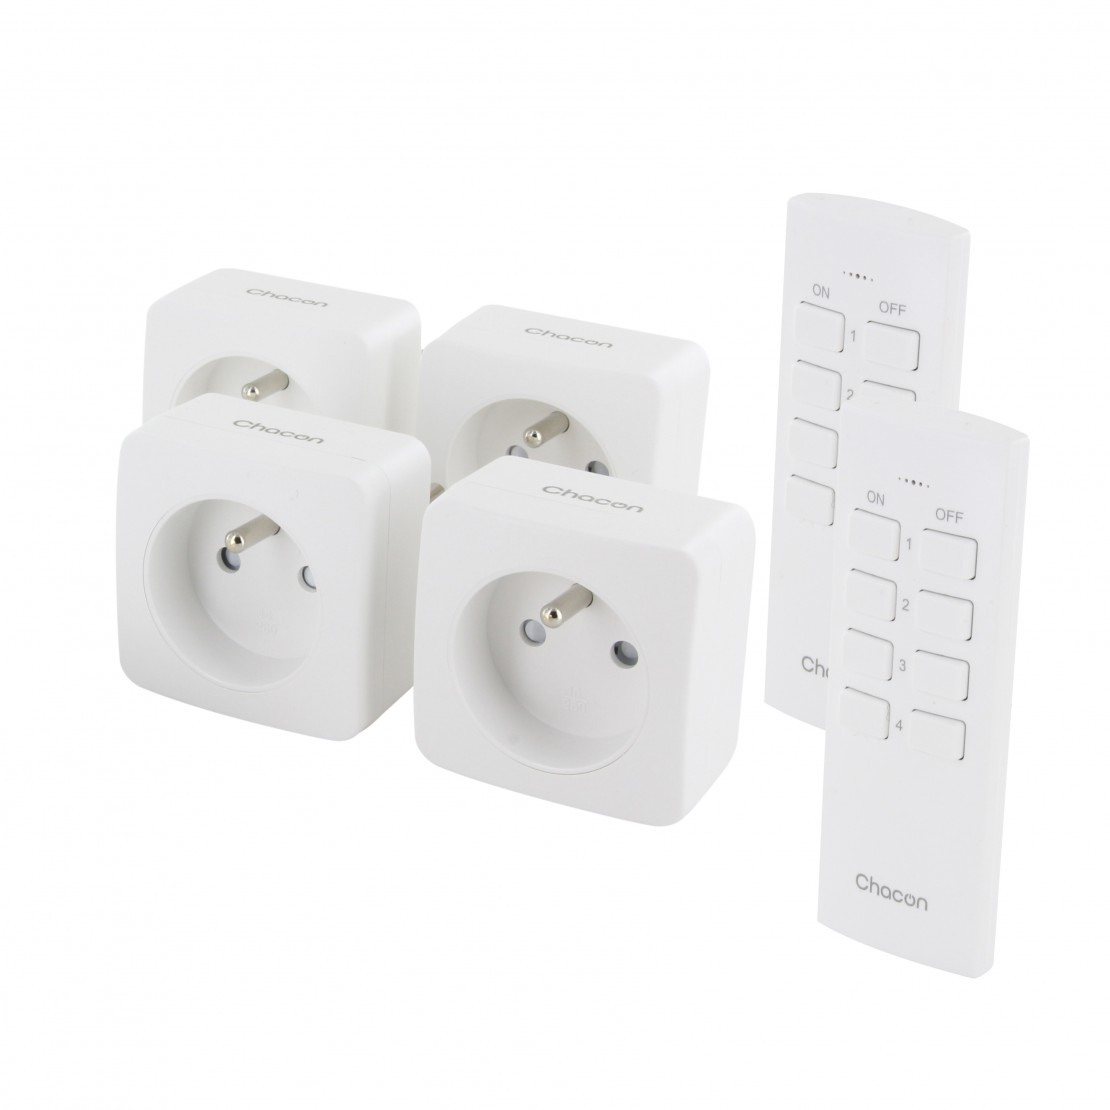 https://chacon.com/13416-large_default/set-of-two-on-off-and-remote-control-mini-sockets.jpg